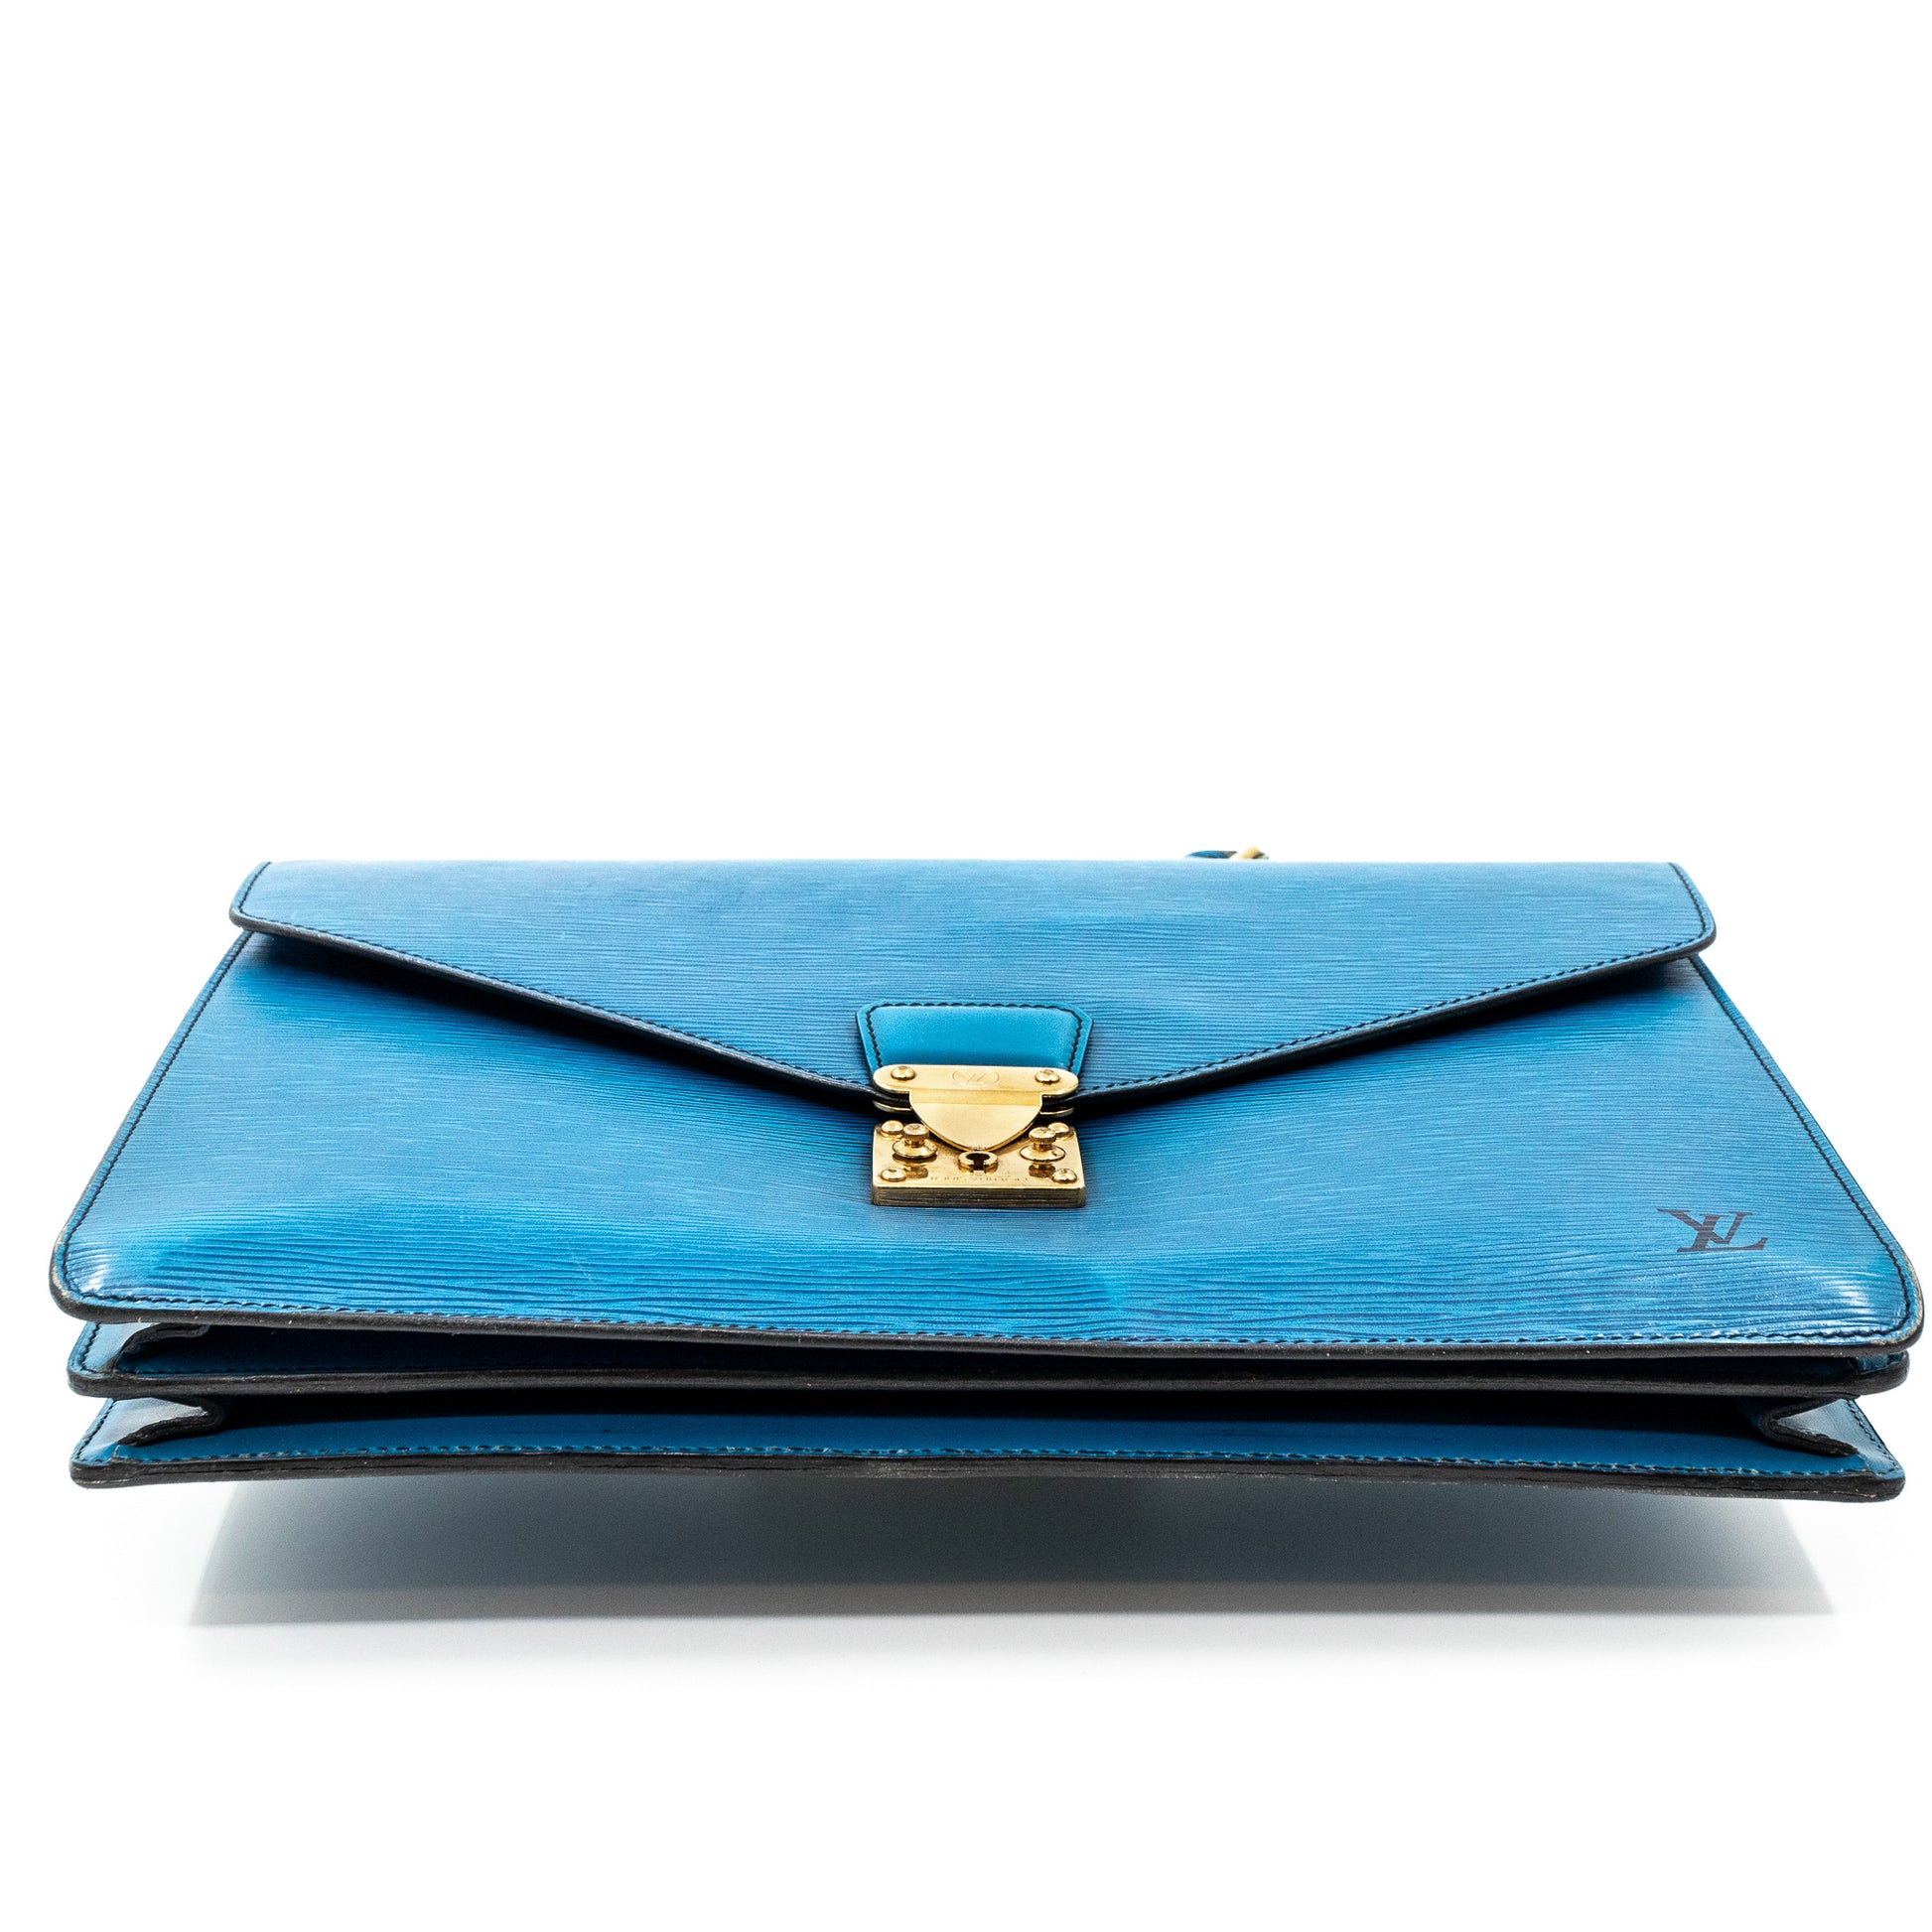 Why I sold my Louis Vuitton Epi envelope clutch 